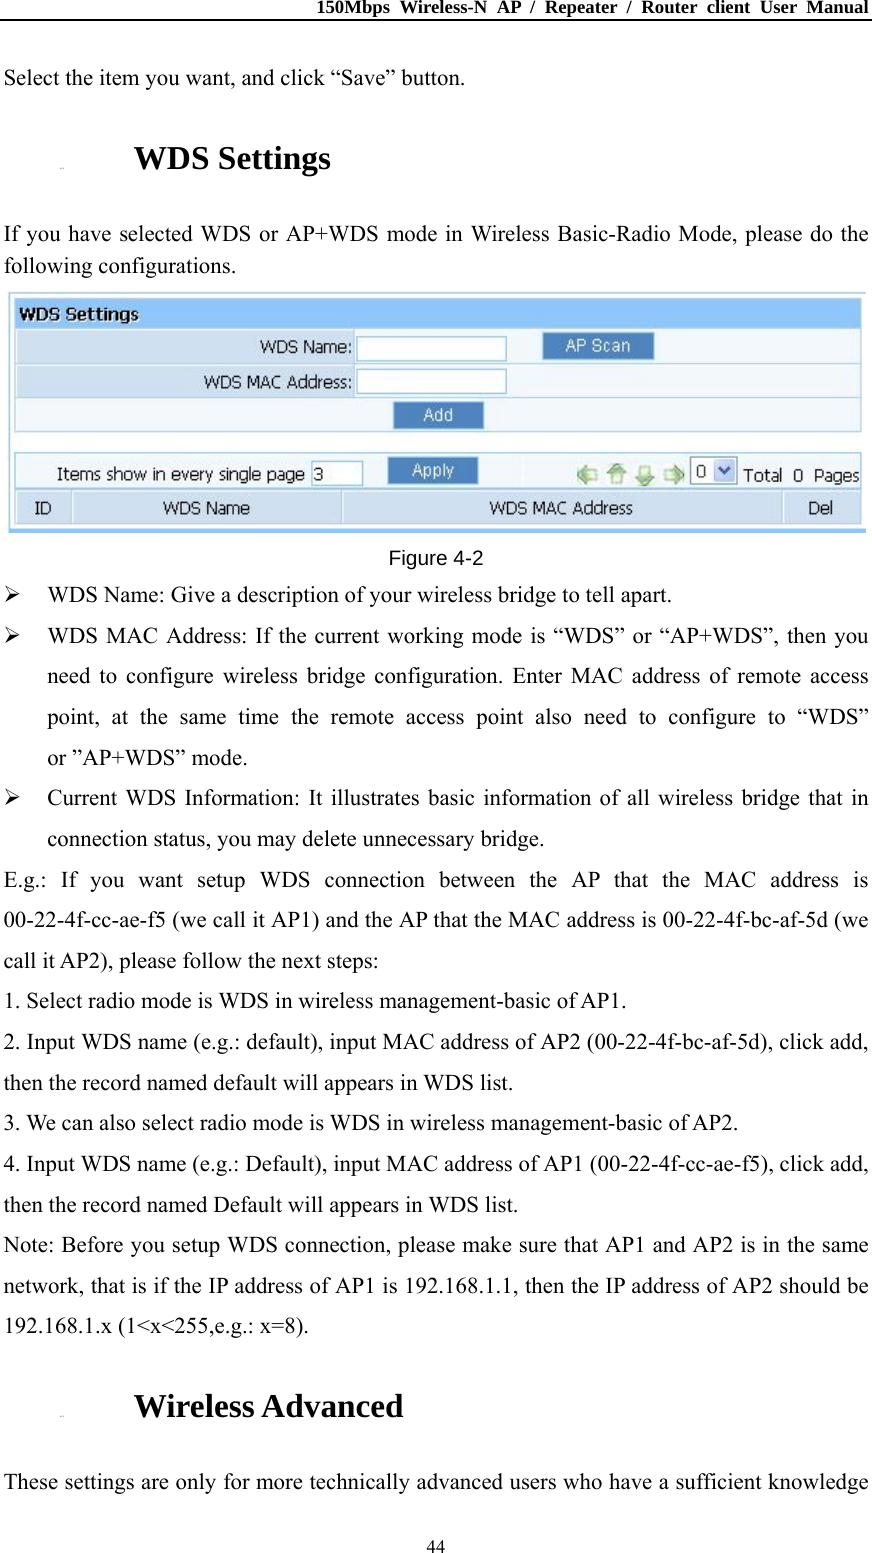 150Mbps Wireless-N AP / Repeater / Router client User Manual  44Select the item you want, and click “Save” button. 4.5.4. WDS Settings If you have selected WDS or AP+WDS mode in Wireless Basic-Radio Mode, please do the following configurations.  Figure 4-2  WDS Name: Give a description of your wireless bridge to tell apart.  WDS MAC Address: If the current working mode is “WDS” or “AP+WDS”, then you need to configure wireless bridge configuration. Enter MAC address of remote access point, at the same time the remote access point also need to configure to “WDS” or ”AP+WDS” mode.  Current WDS Information: It illustrates basic information of all wireless bridge that in connection status, you may delete unnecessary bridge. E.g.: If you want setup WDS connection between the AP that the MAC address is 00-22-4f-cc-ae-f5 (we call it AP1) and the AP that the MAC address is 00-22-4f-bc-af-5d (we call it AP2), please follow the next steps: 1. Select radio mode is WDS in wireless management-basic of AP1. 2. Input WDS name (e.g.: default), input MAC address of AP2 (00-22-4f-bc-af-5d), click add, then the record named default will appears in WDS list. 3. We can also select radio mode is WDS in wireless management-basic of AP2. 4. Input WDS name (e.g.: Default), input MAC address of AP1 (00-22-4f-cc-ae-f5), click add, then the record named Default will appears in WDS list. Note: Before you setup WDS connection, please make sure that AP1 and AP2 is in the same network, that is if the IP address of AP1 is 192.168.1.1, then the IP address of AP2 should be 192.168.1.x (1&lt;x&lt;255,e.g.: x=8). 4.5.5. Wireless Advanced These settings are only for more technically advanced users who have a sufficient knowledge 